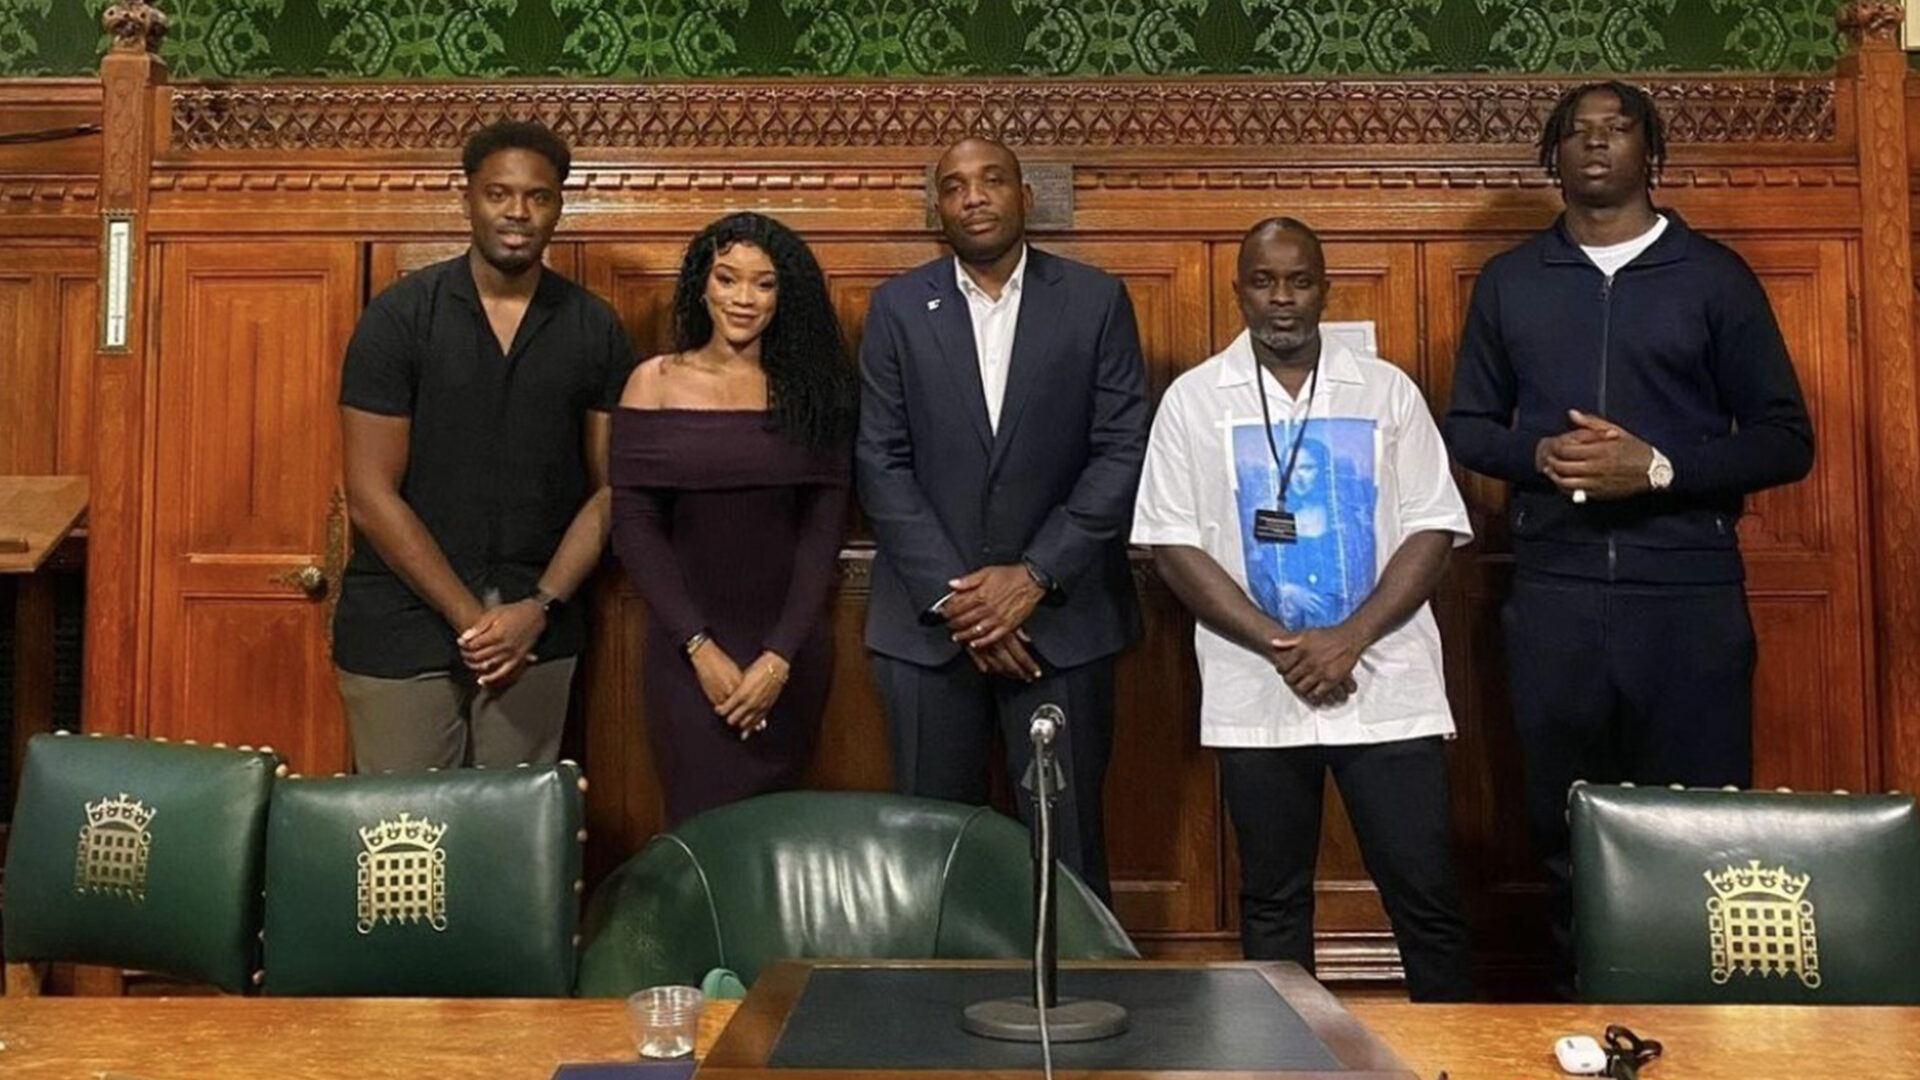 Enact Equality hosted a panel event at the Houses of Parliament to provide a thought-provoking discussion centred on topics relating to county lines, gang violence, drug use and structural inequality.